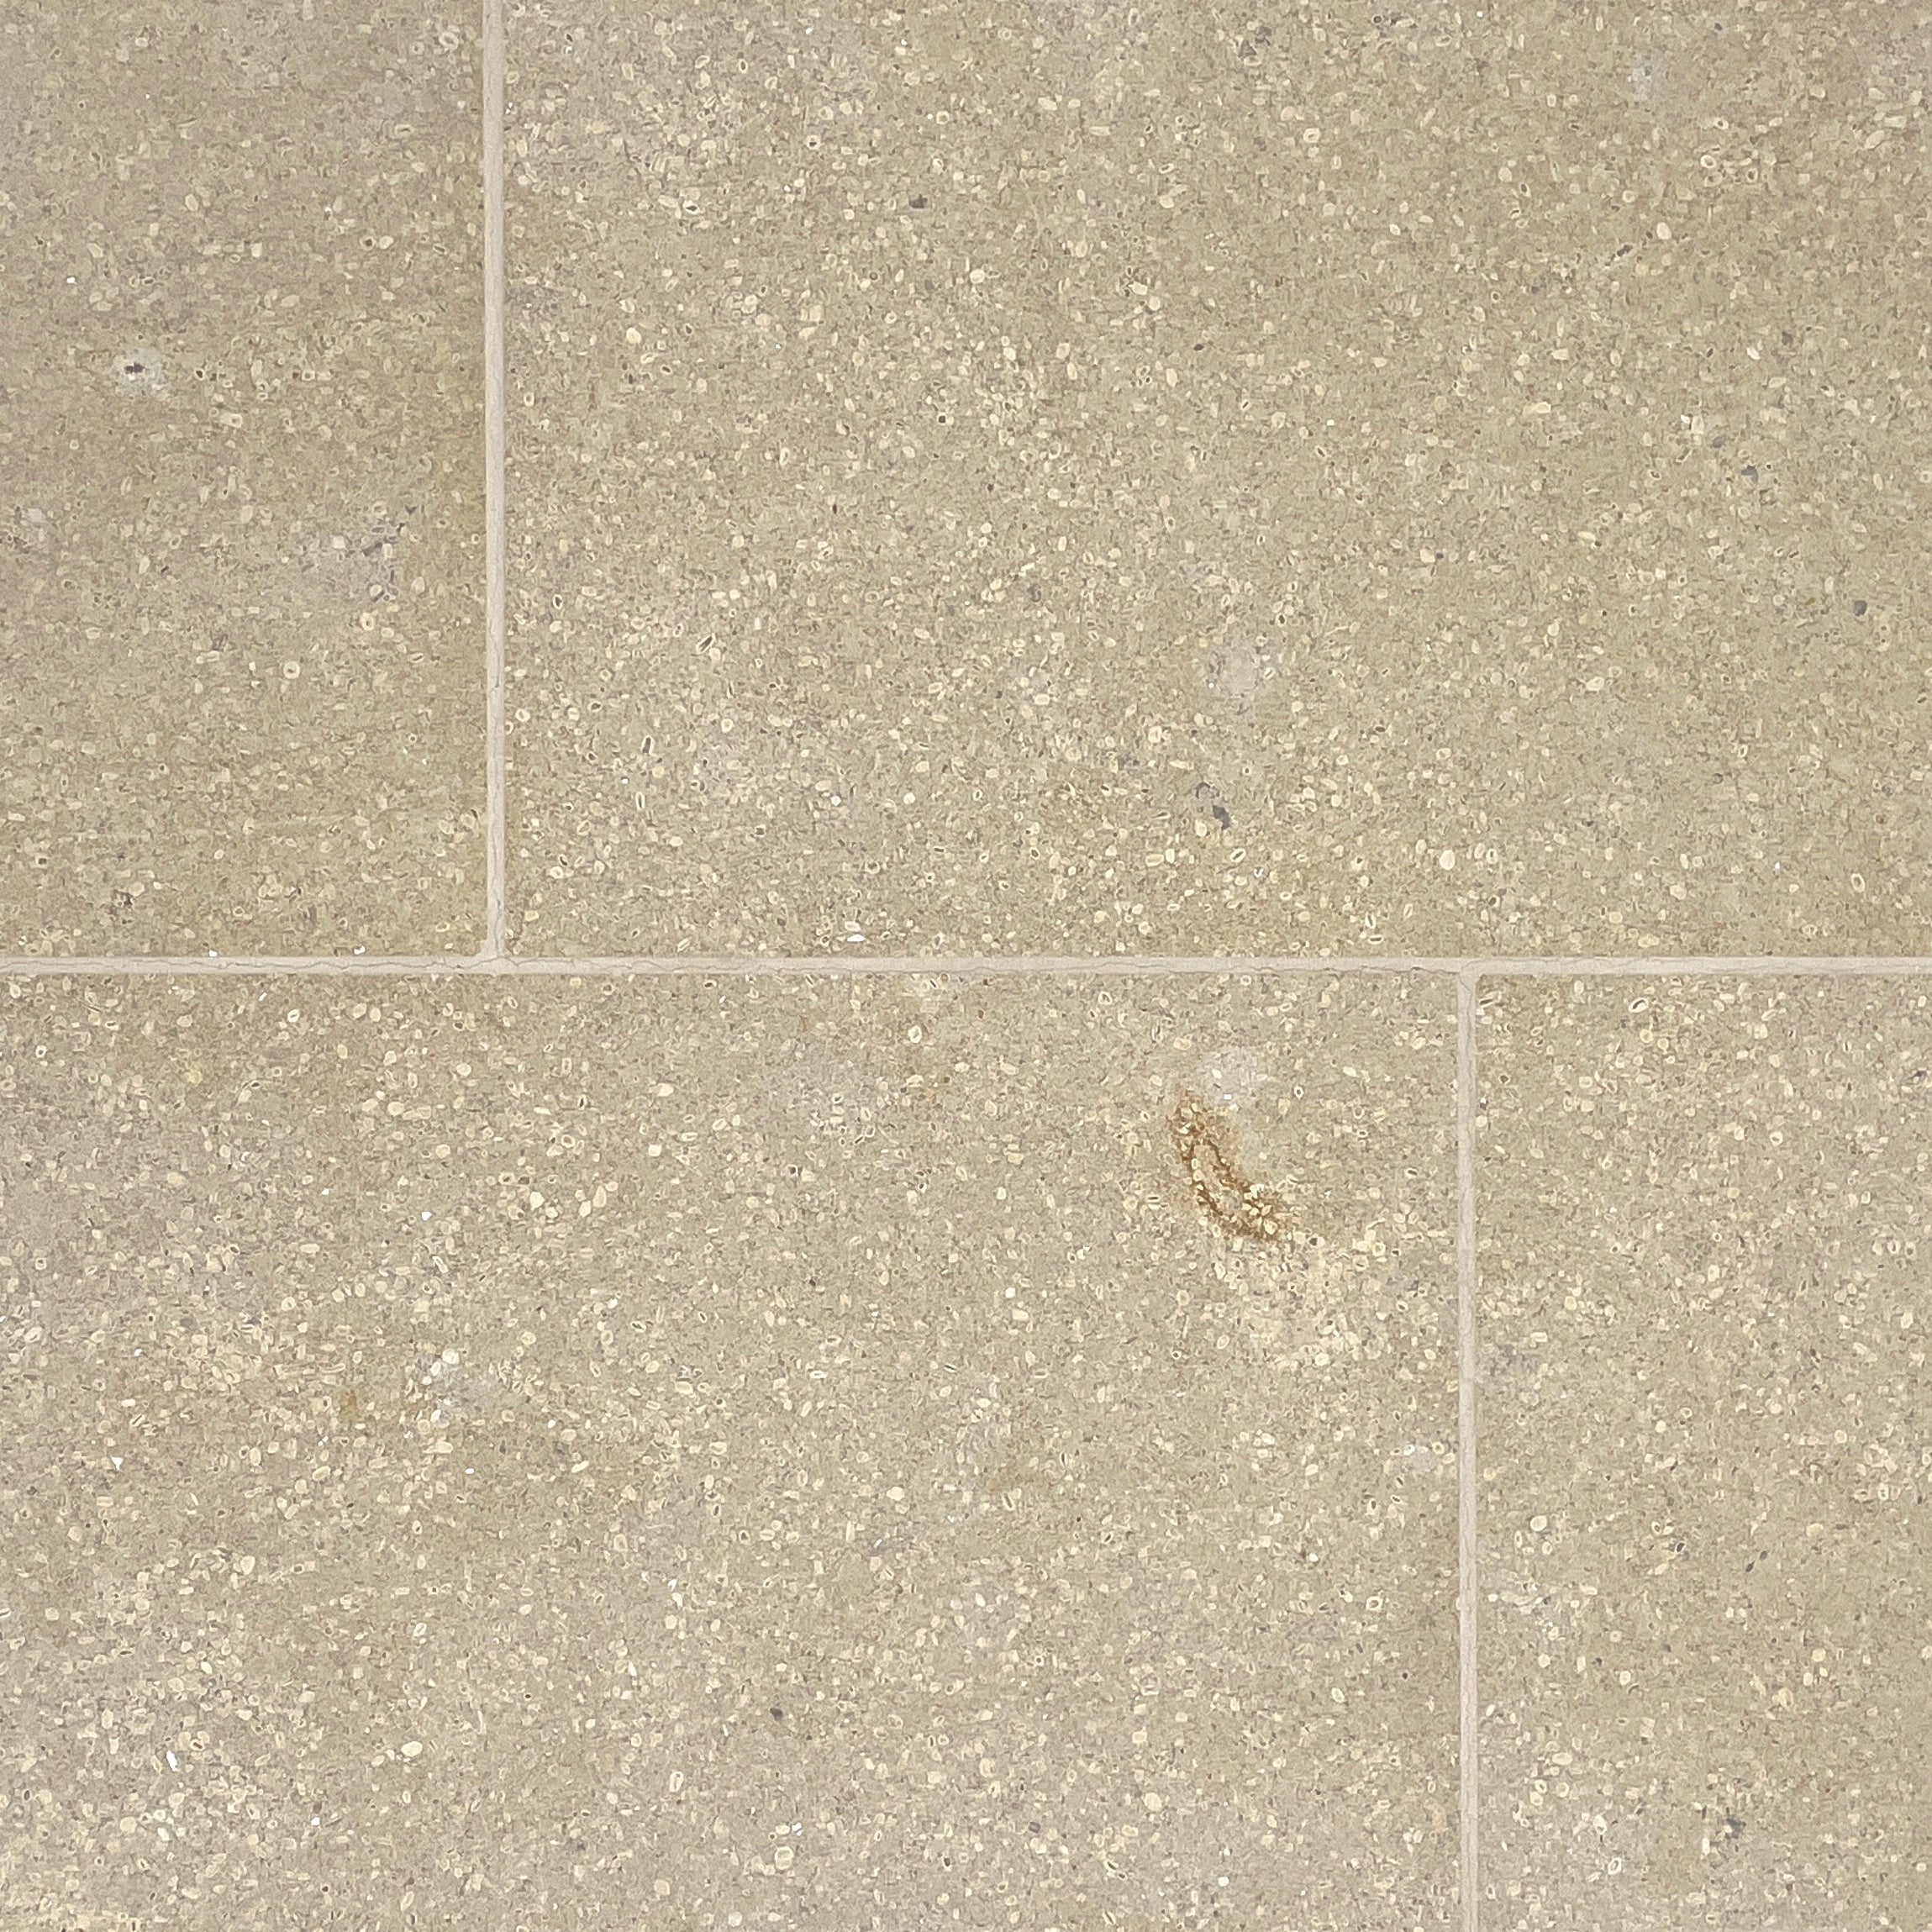 american limestone suede beige versailles pattern interior natural stone tile for floor and wall made in united states distributed by surface group international